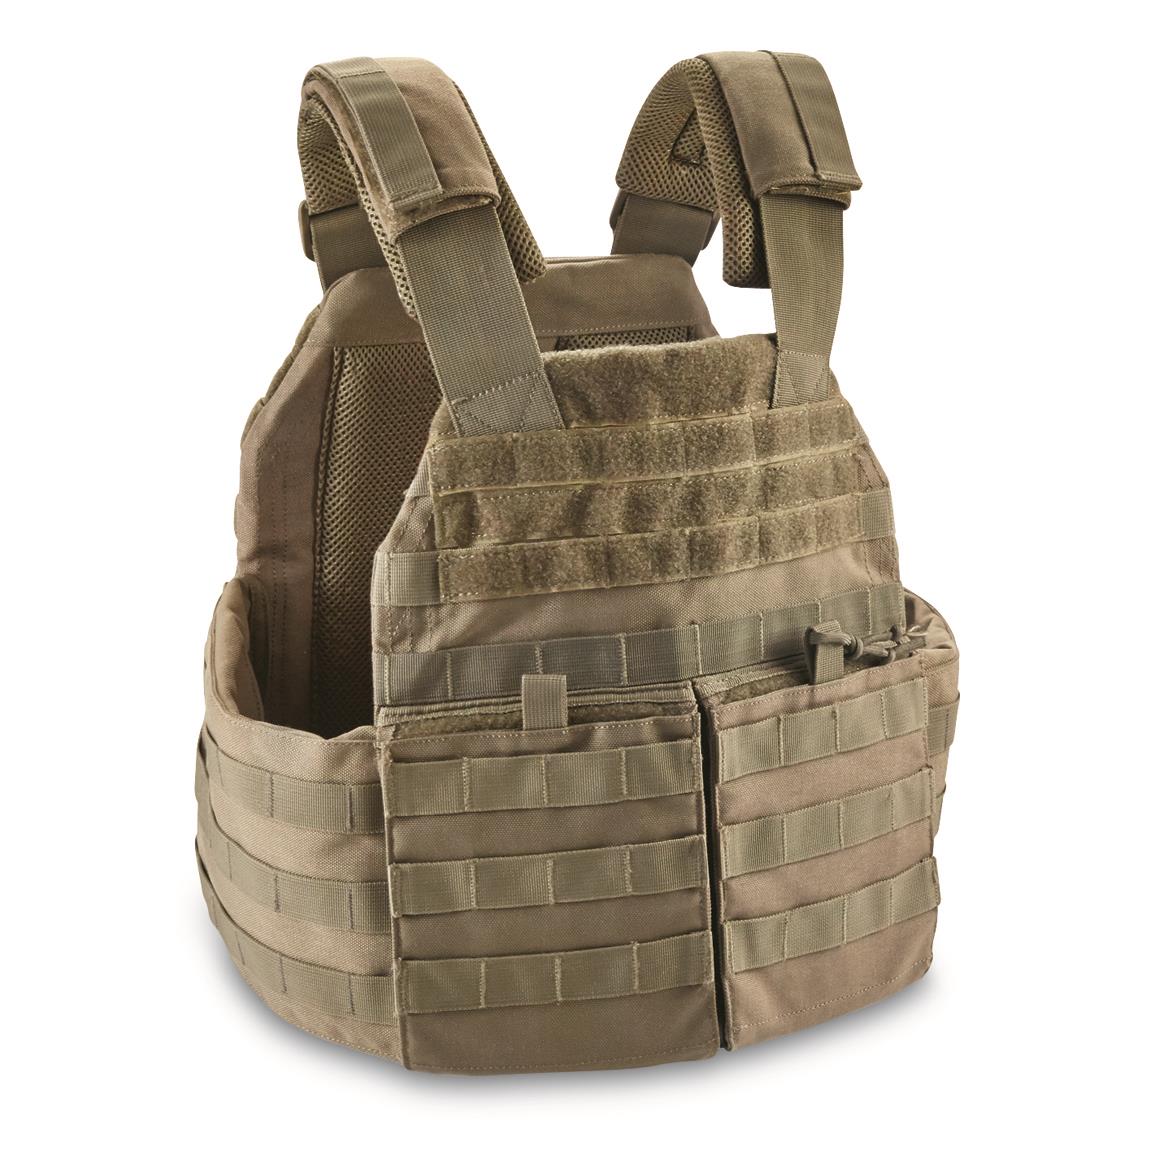 5.11 Tactical Rush24 2.0 Backpack - 719646, Armor Plate Carrier Vests ...